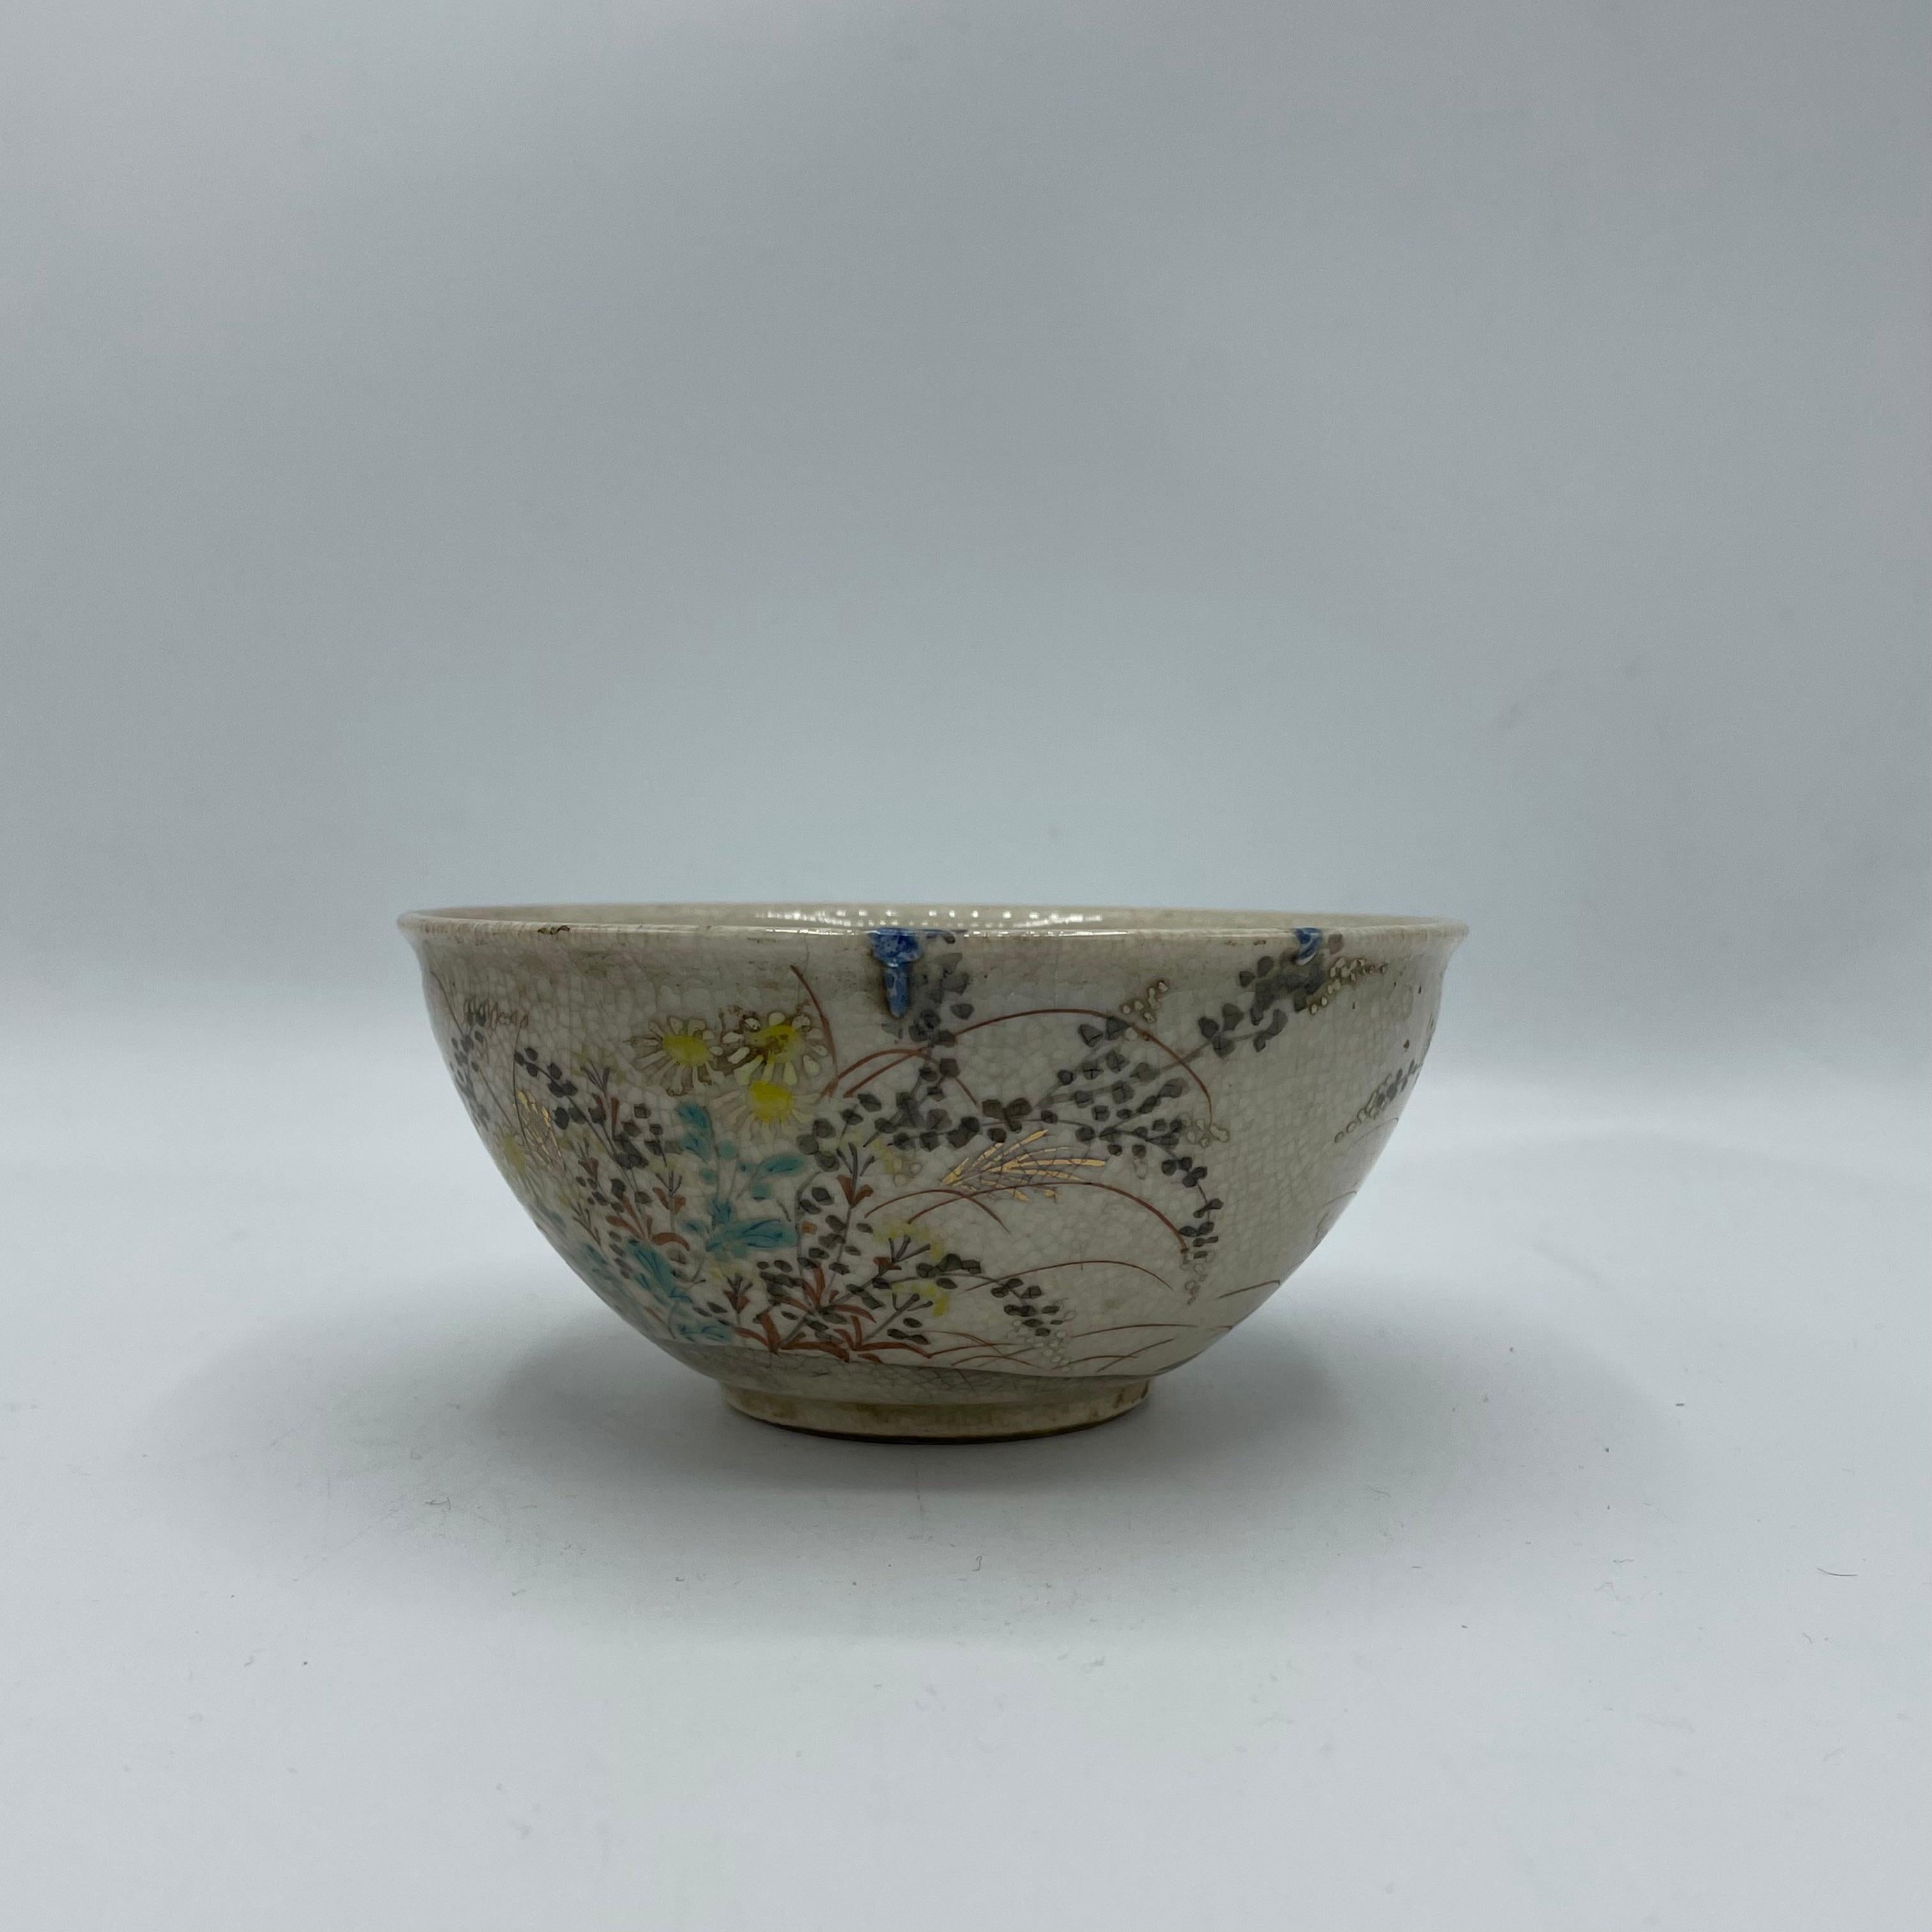 This is a matcha bowl for tea ceremony. This bowl was made in Japan around 1960s in Showa era.
It is made with porcelain. 
This is in good condition but there are some scratches.

Dimensions: 12 x12 x H5.4 cm